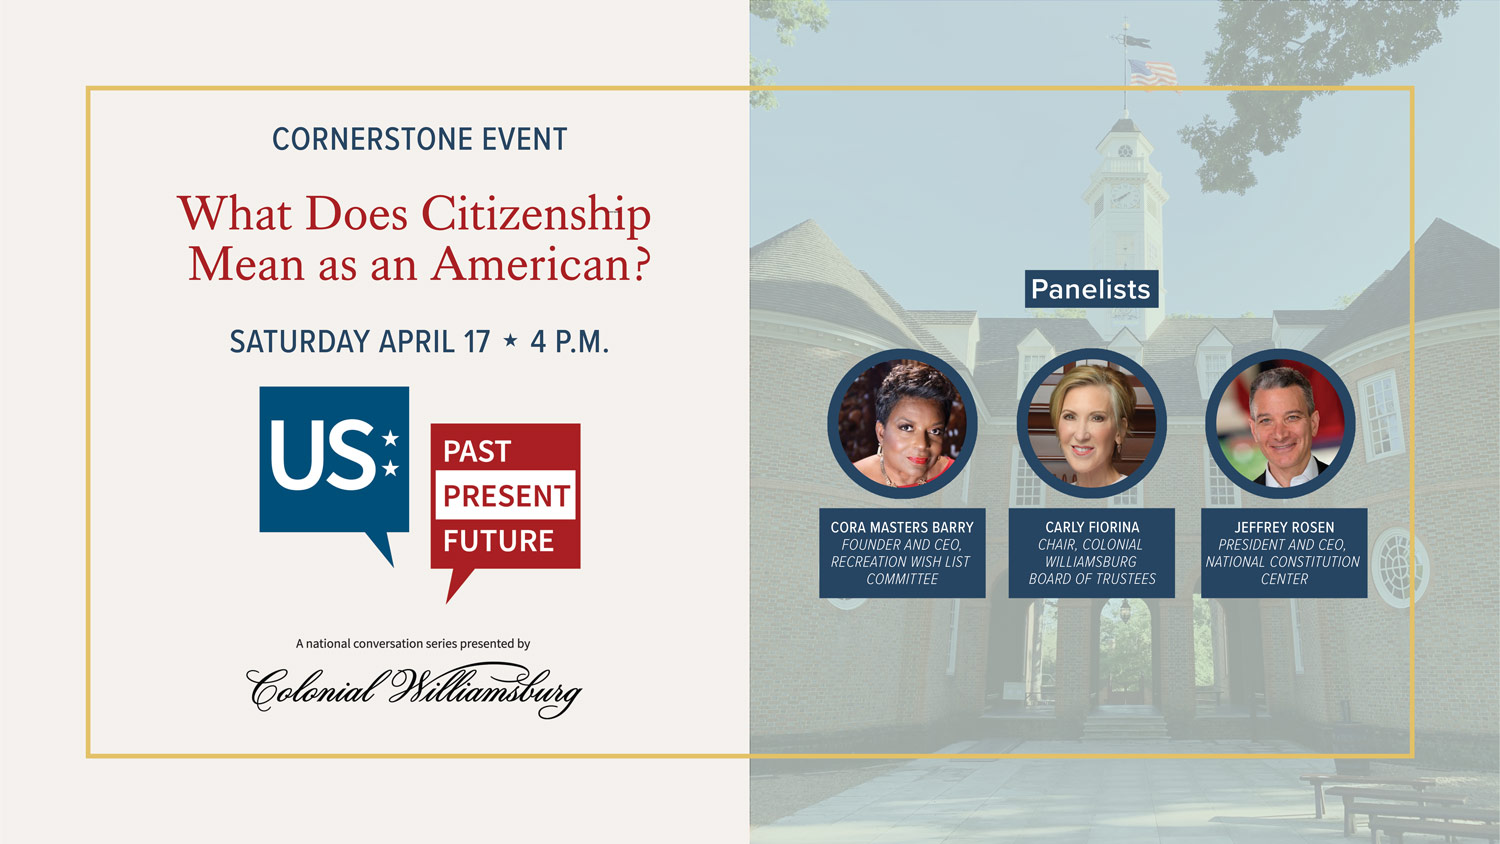 What Does Citizenship Mean as an American?